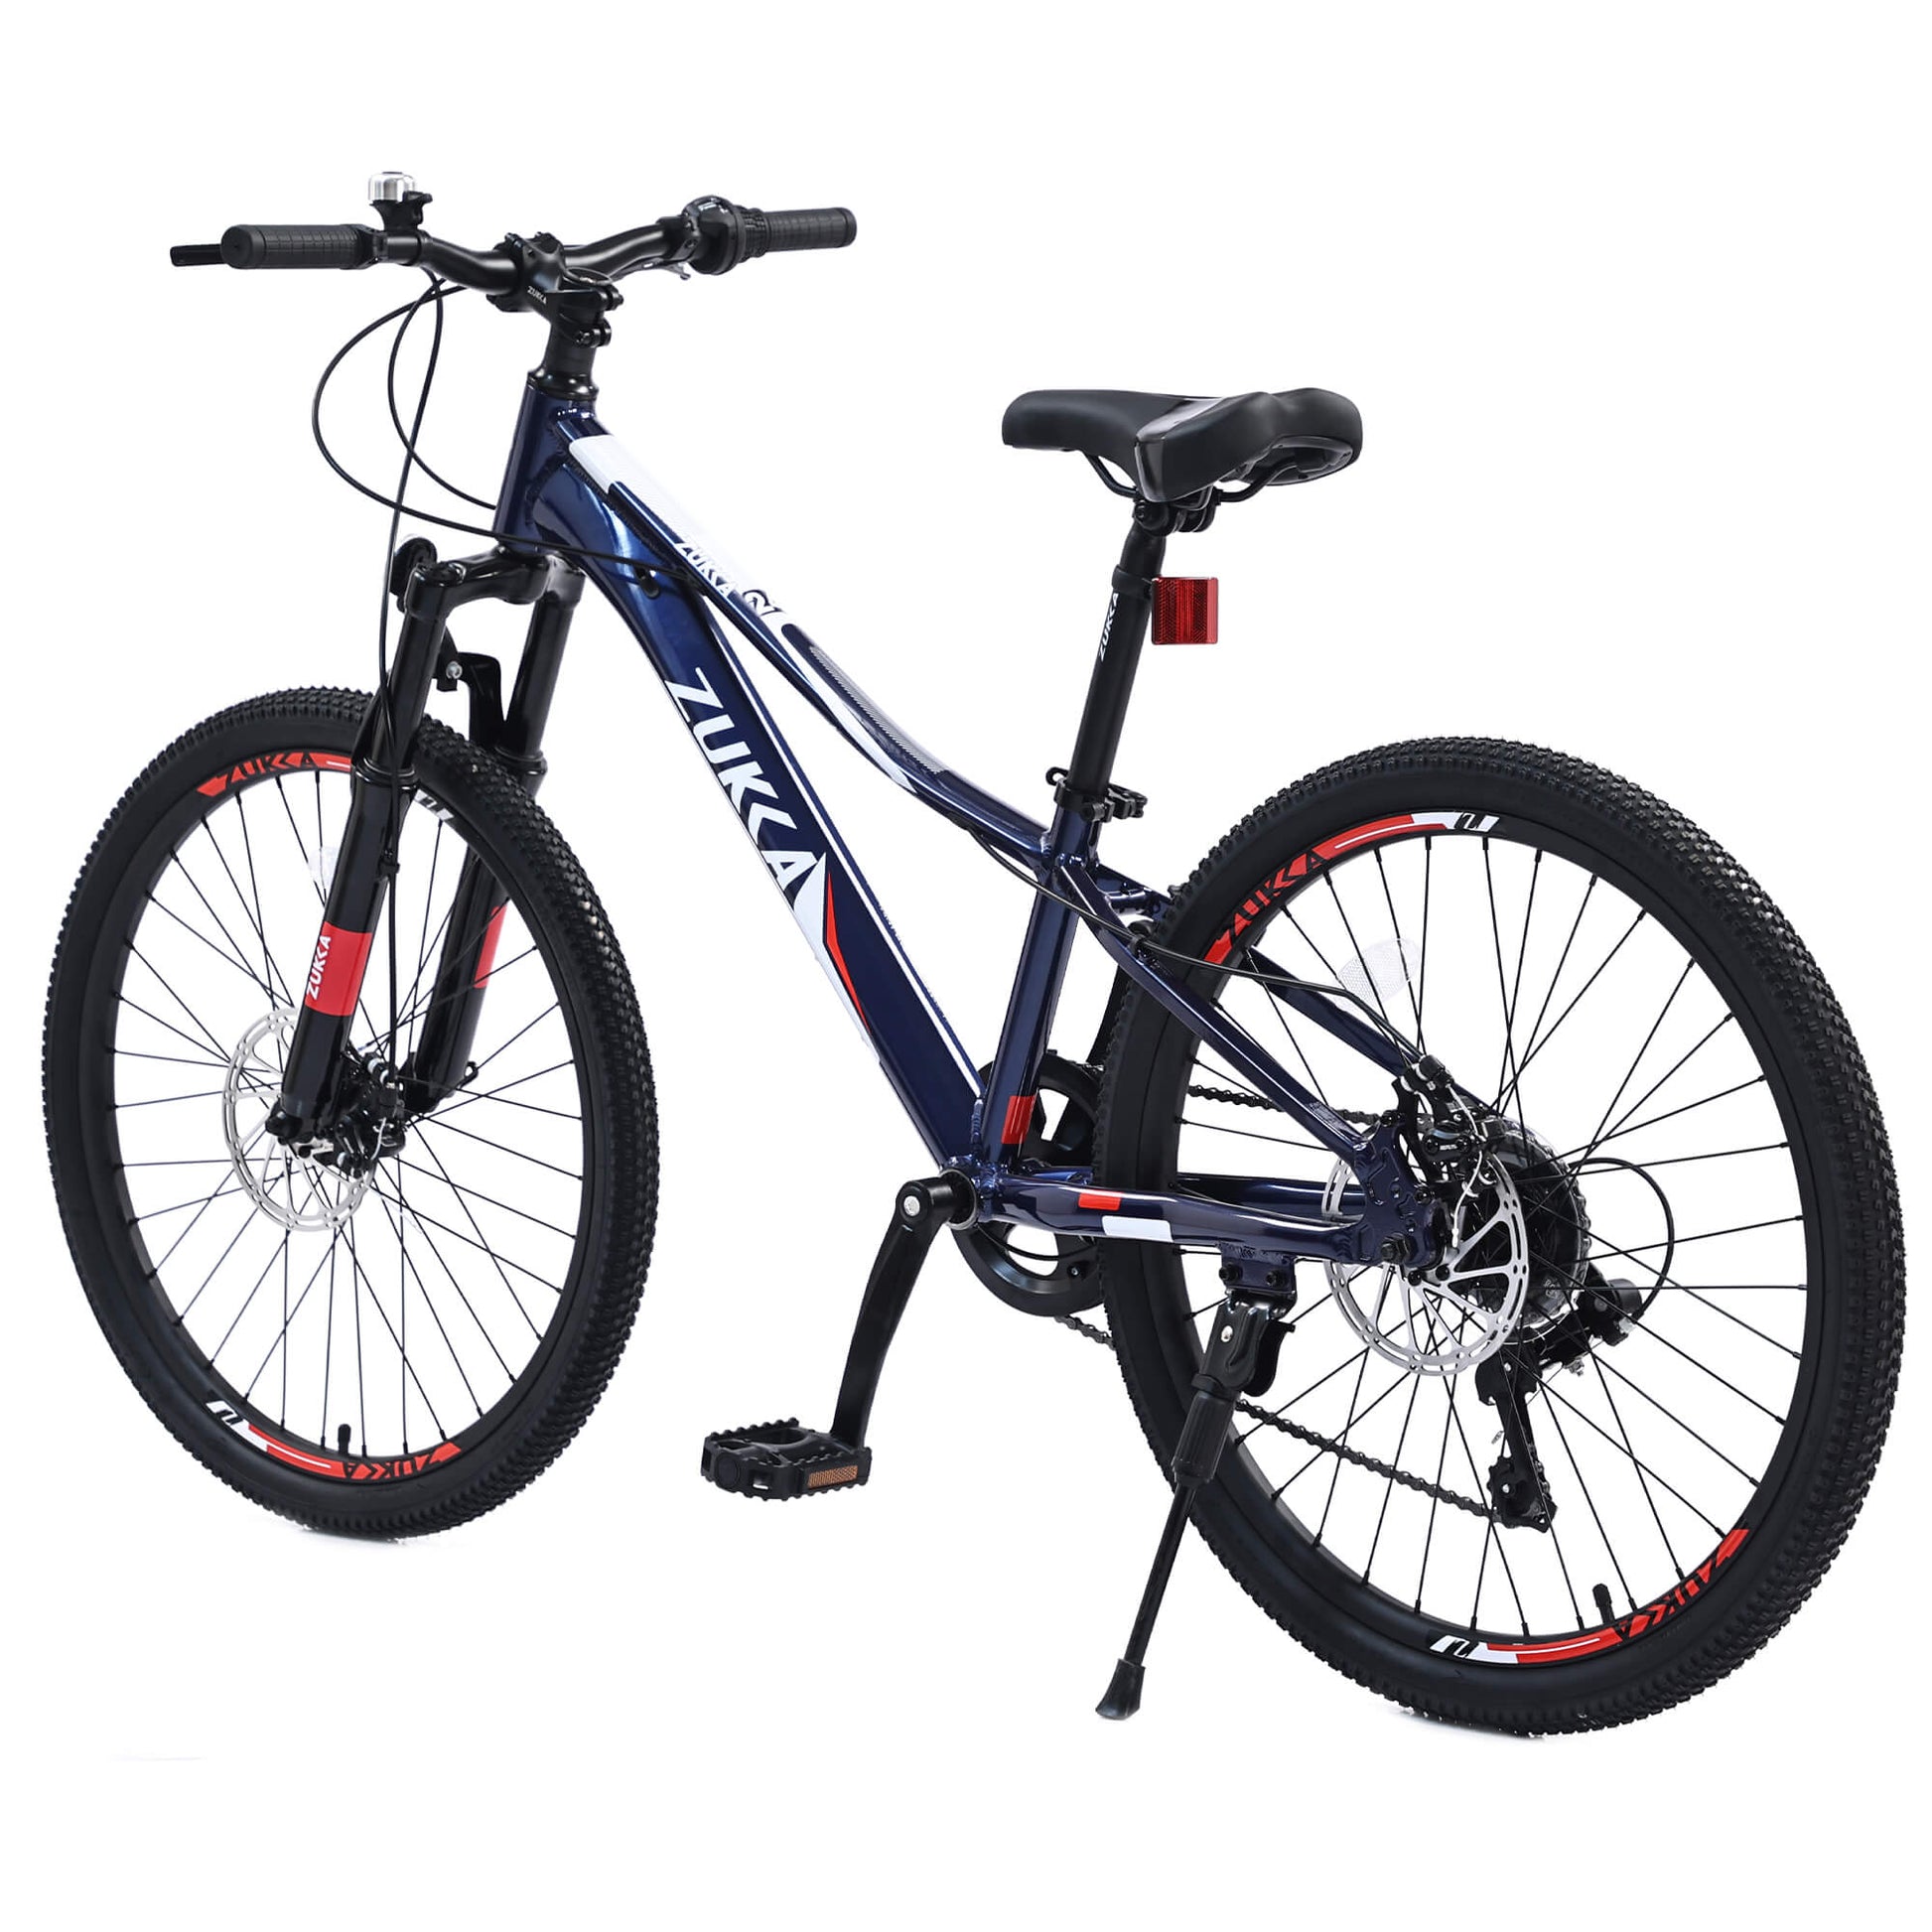 Hycline 24”×2.1" Dynamic Mountain Bike For Youth And Adults